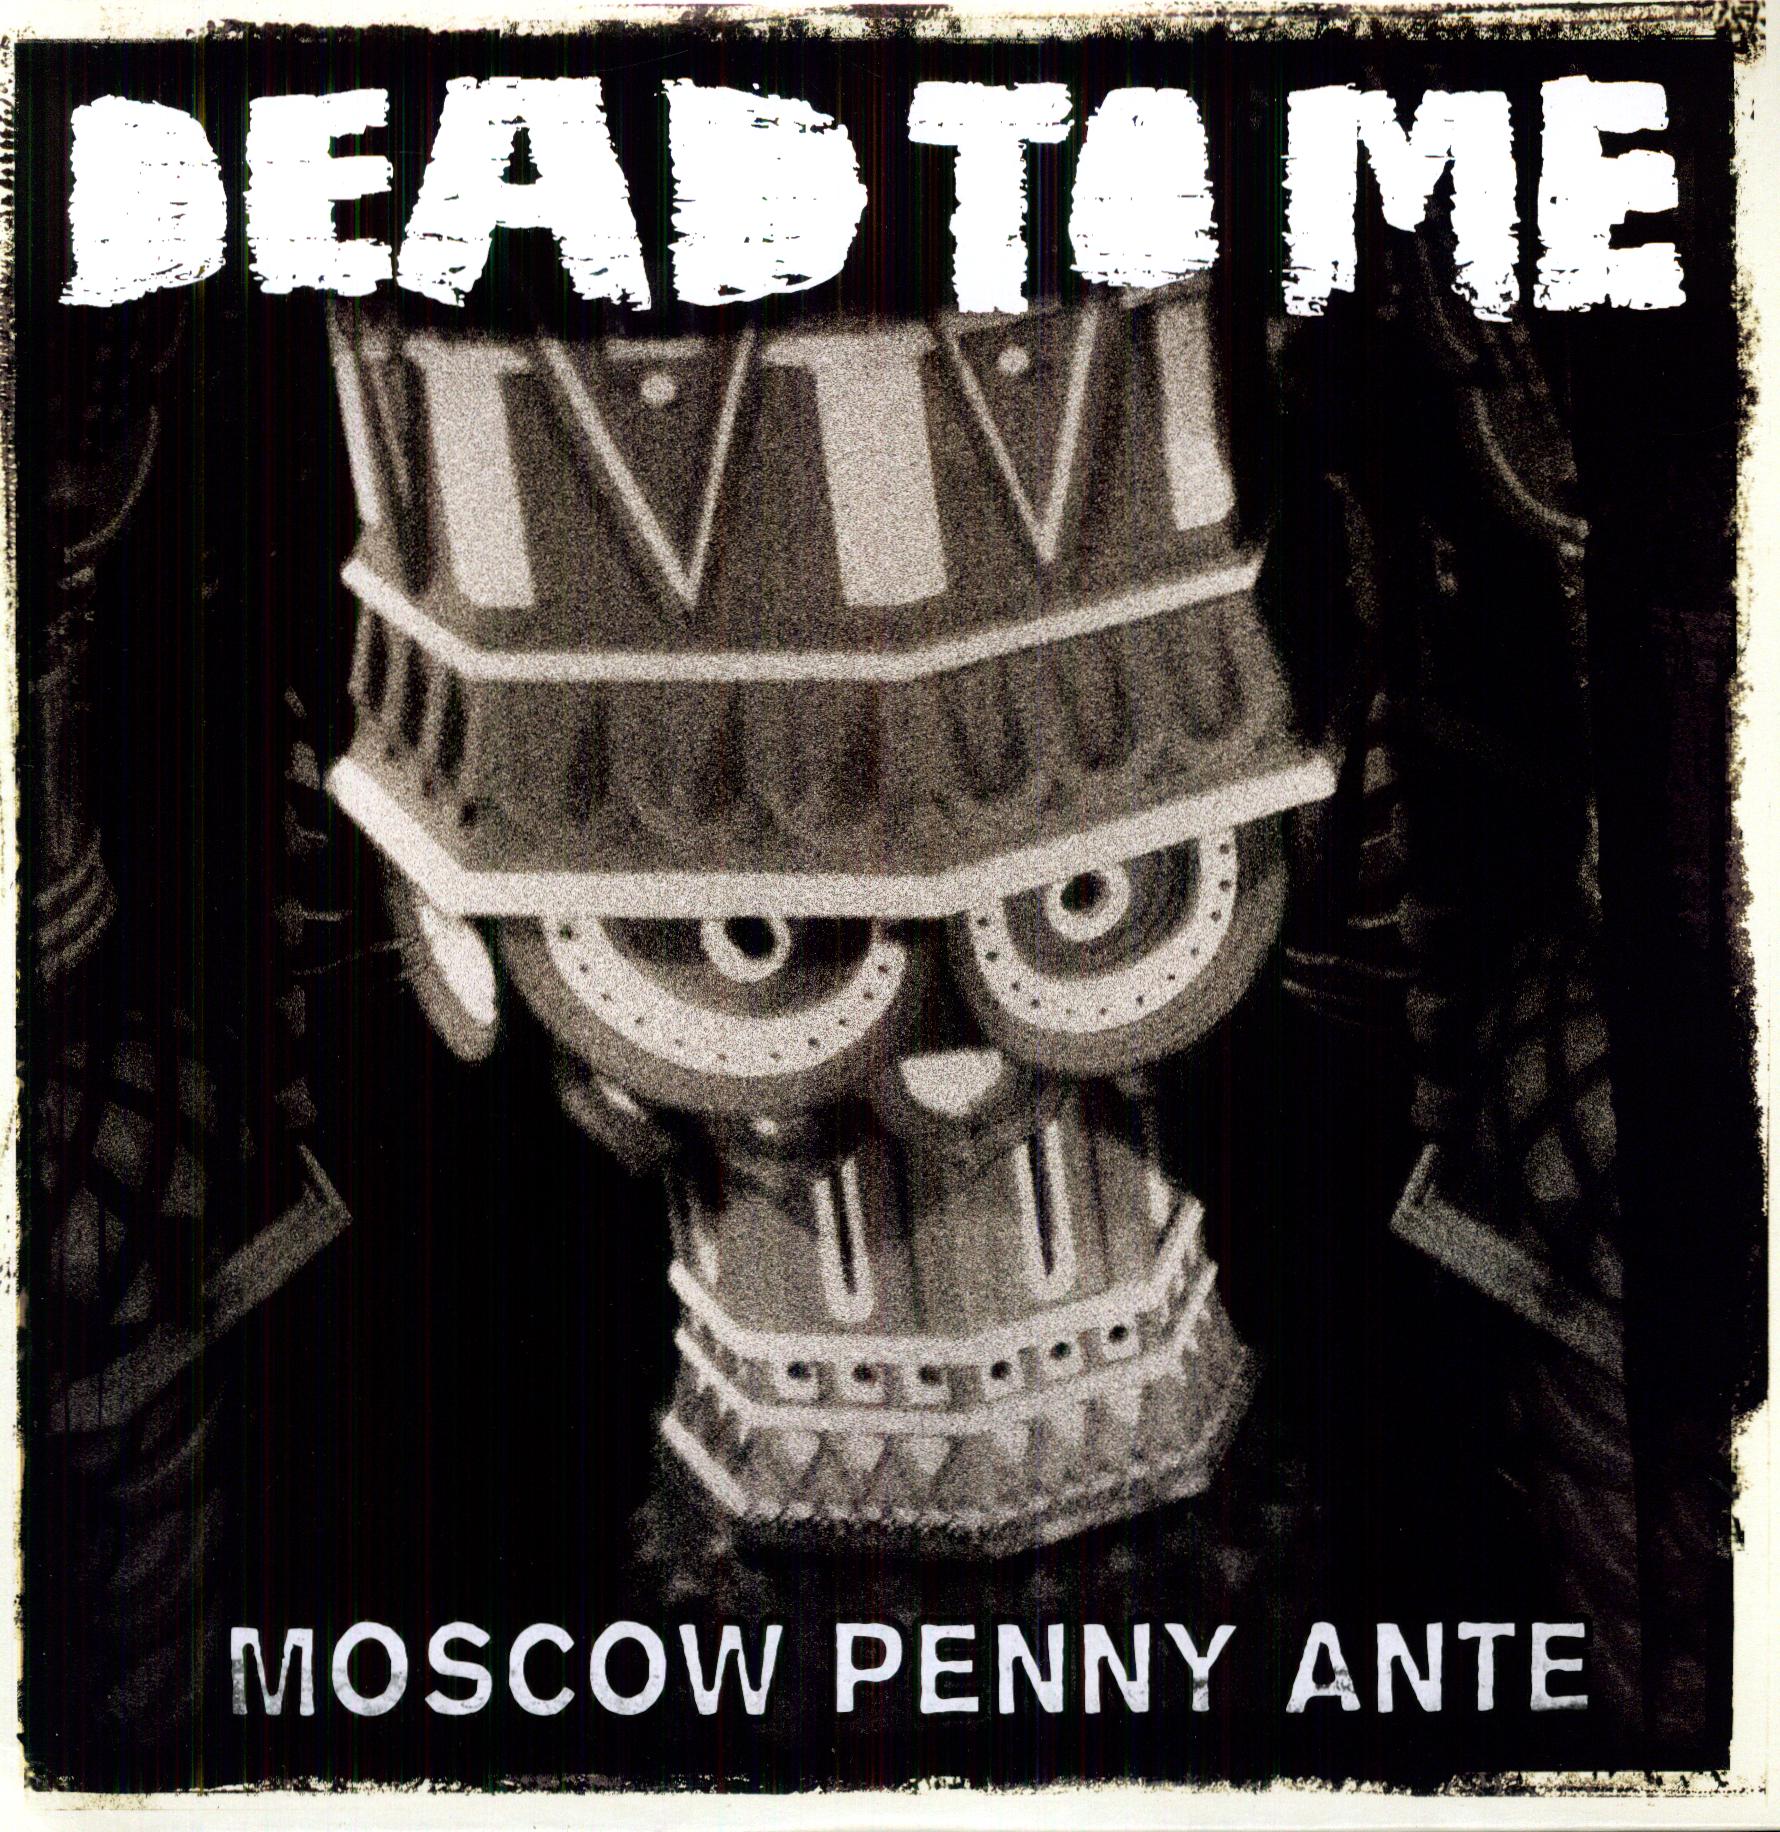 MOSCOW PENNY ANTE